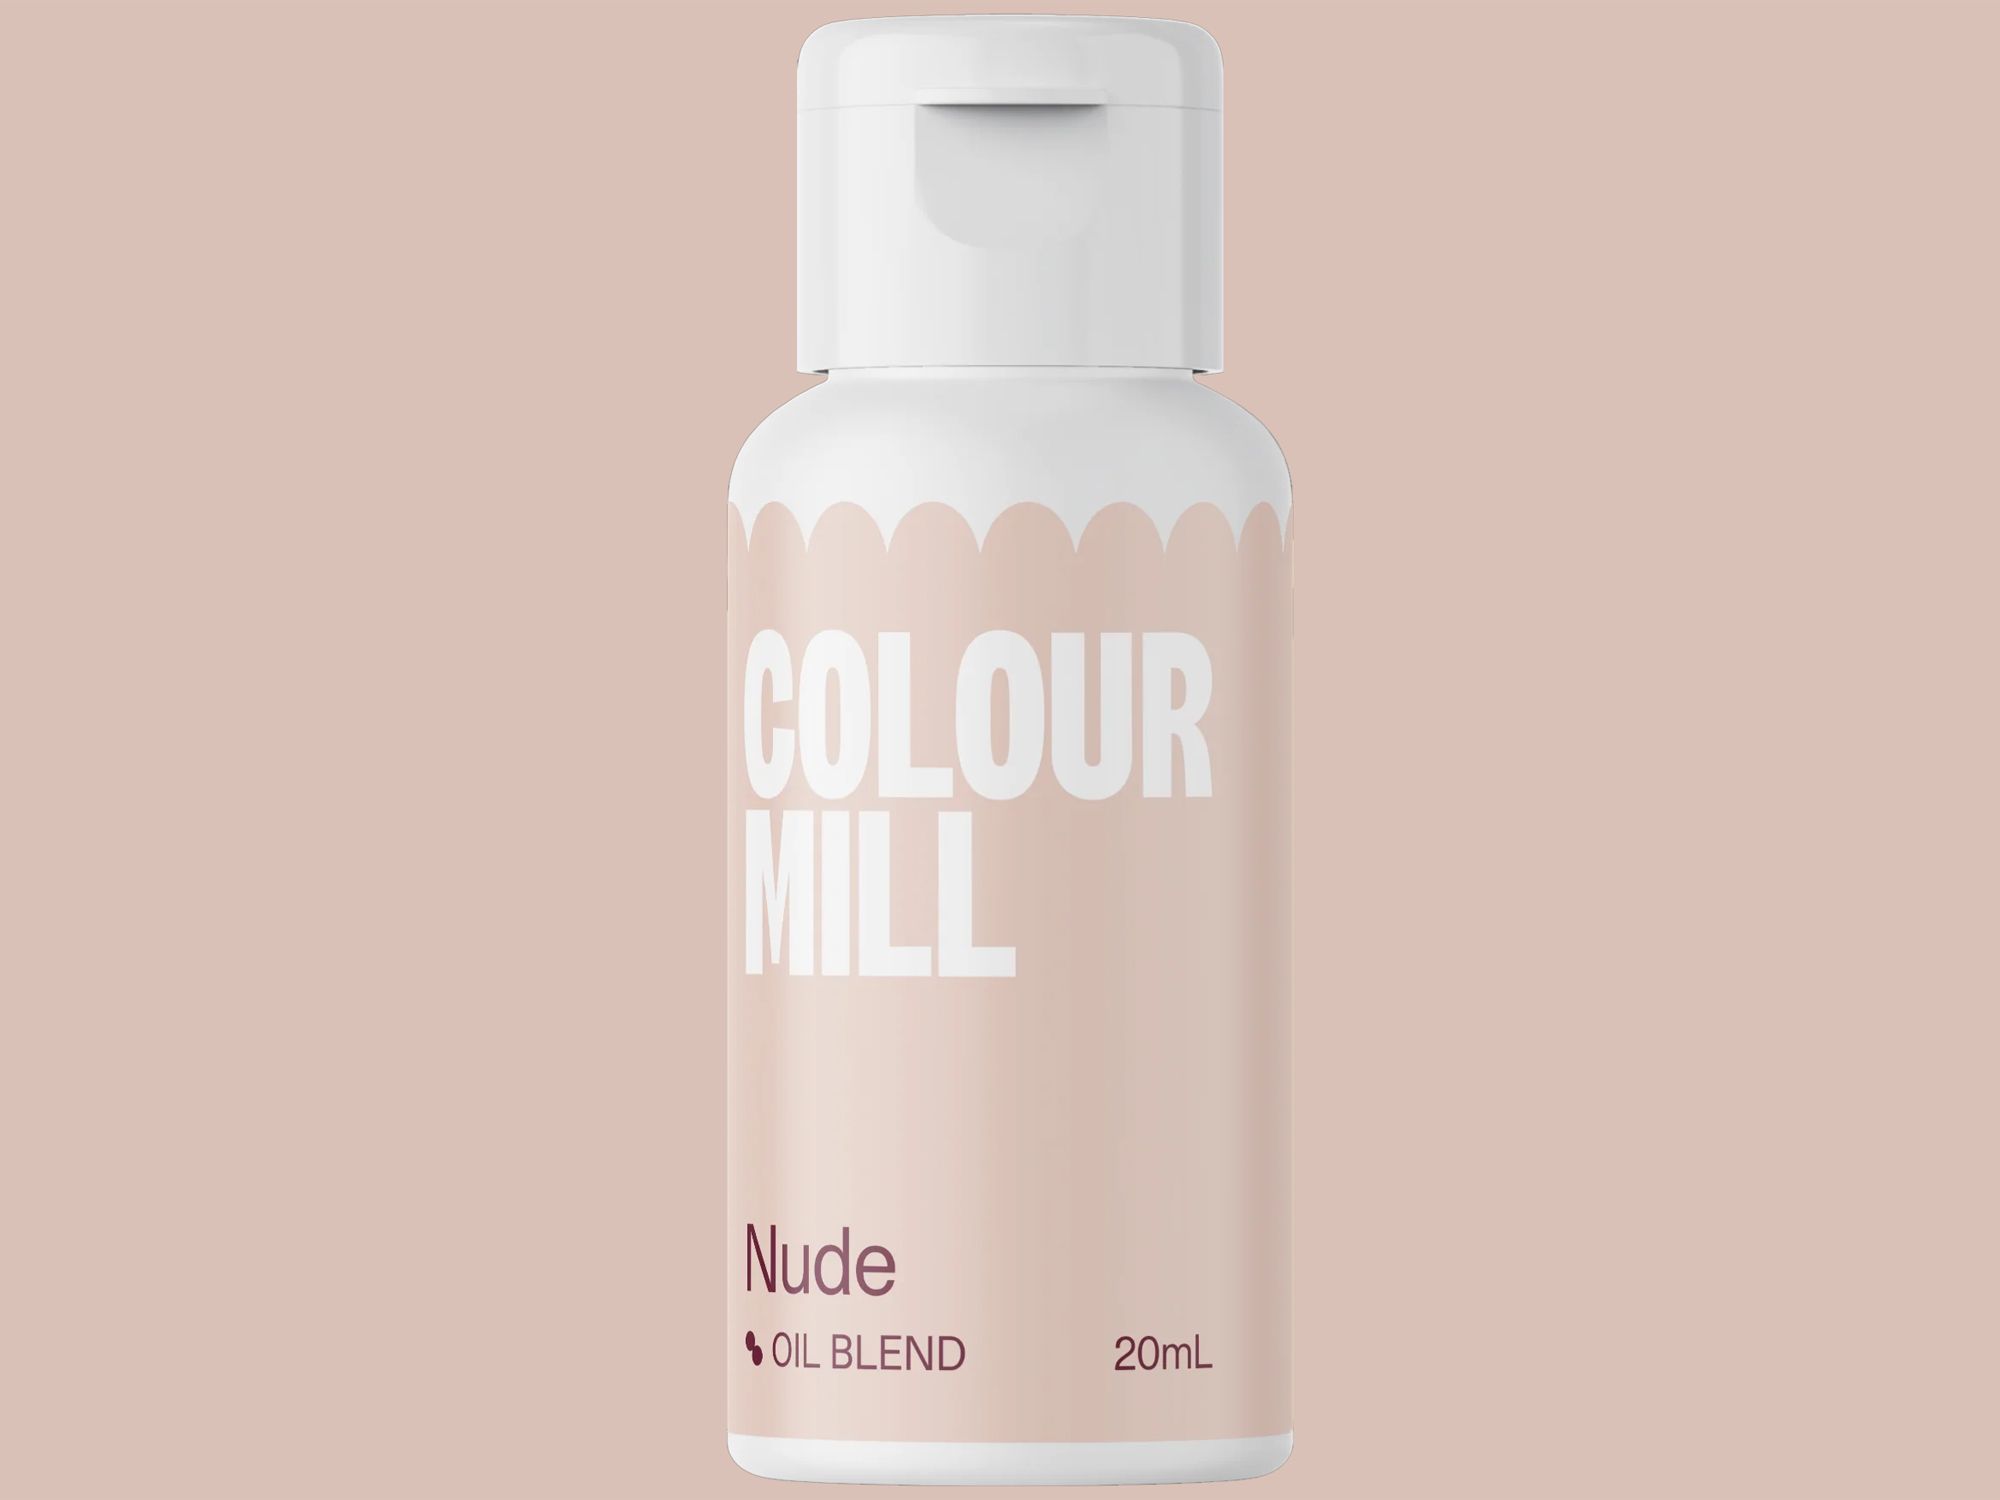 Colour Mill Nude (Oil Blend) 20ml